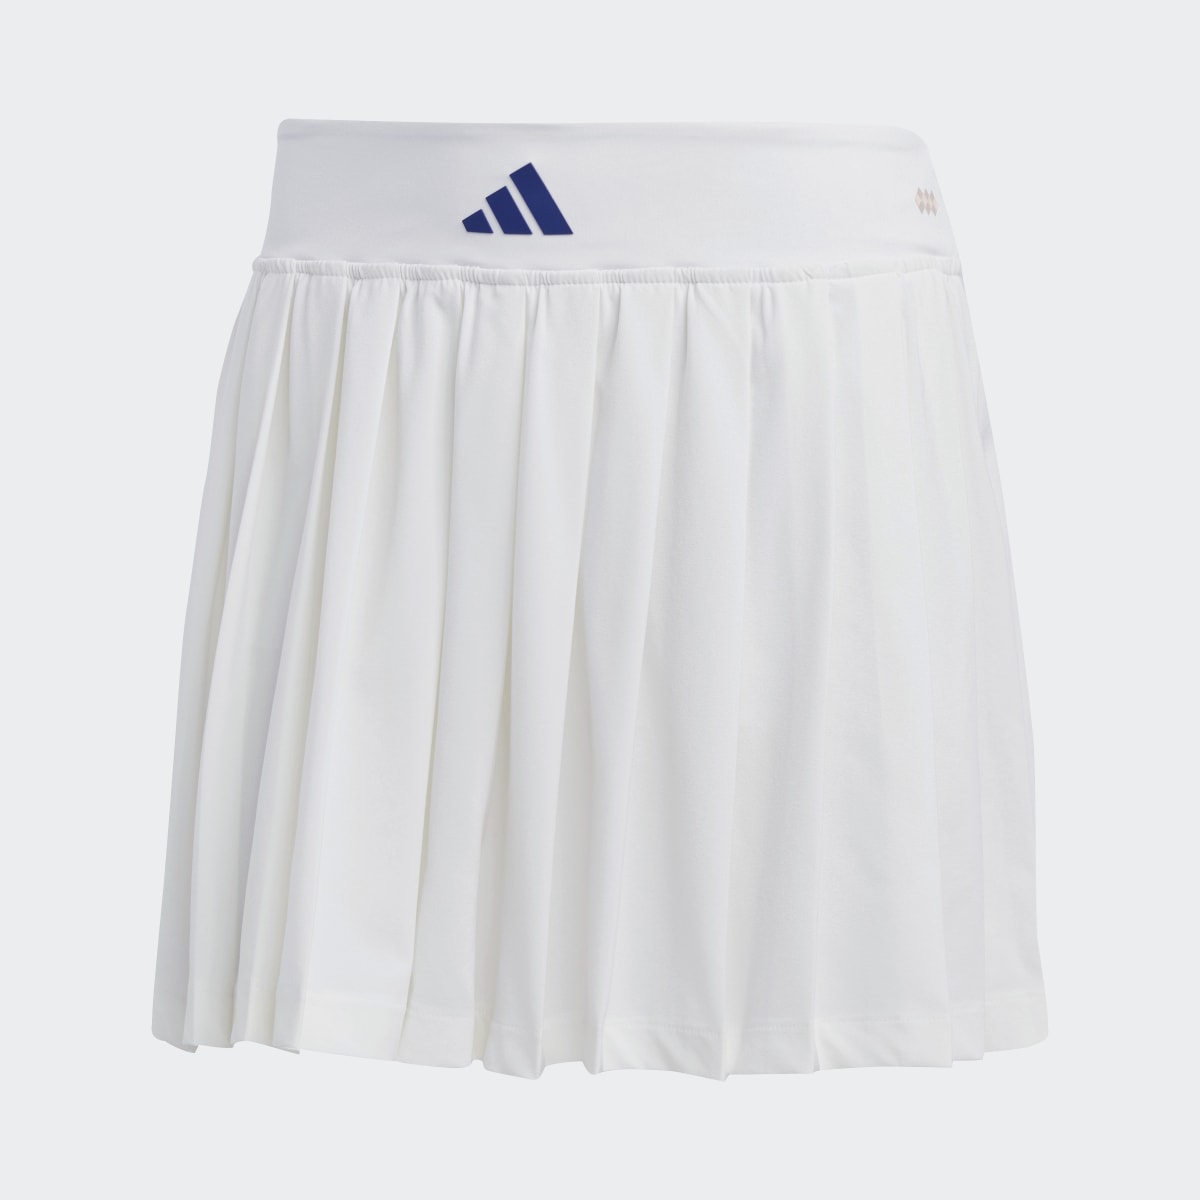 Adidas Clubhouse Premium Classic Tennis Pleated Skirt. 4